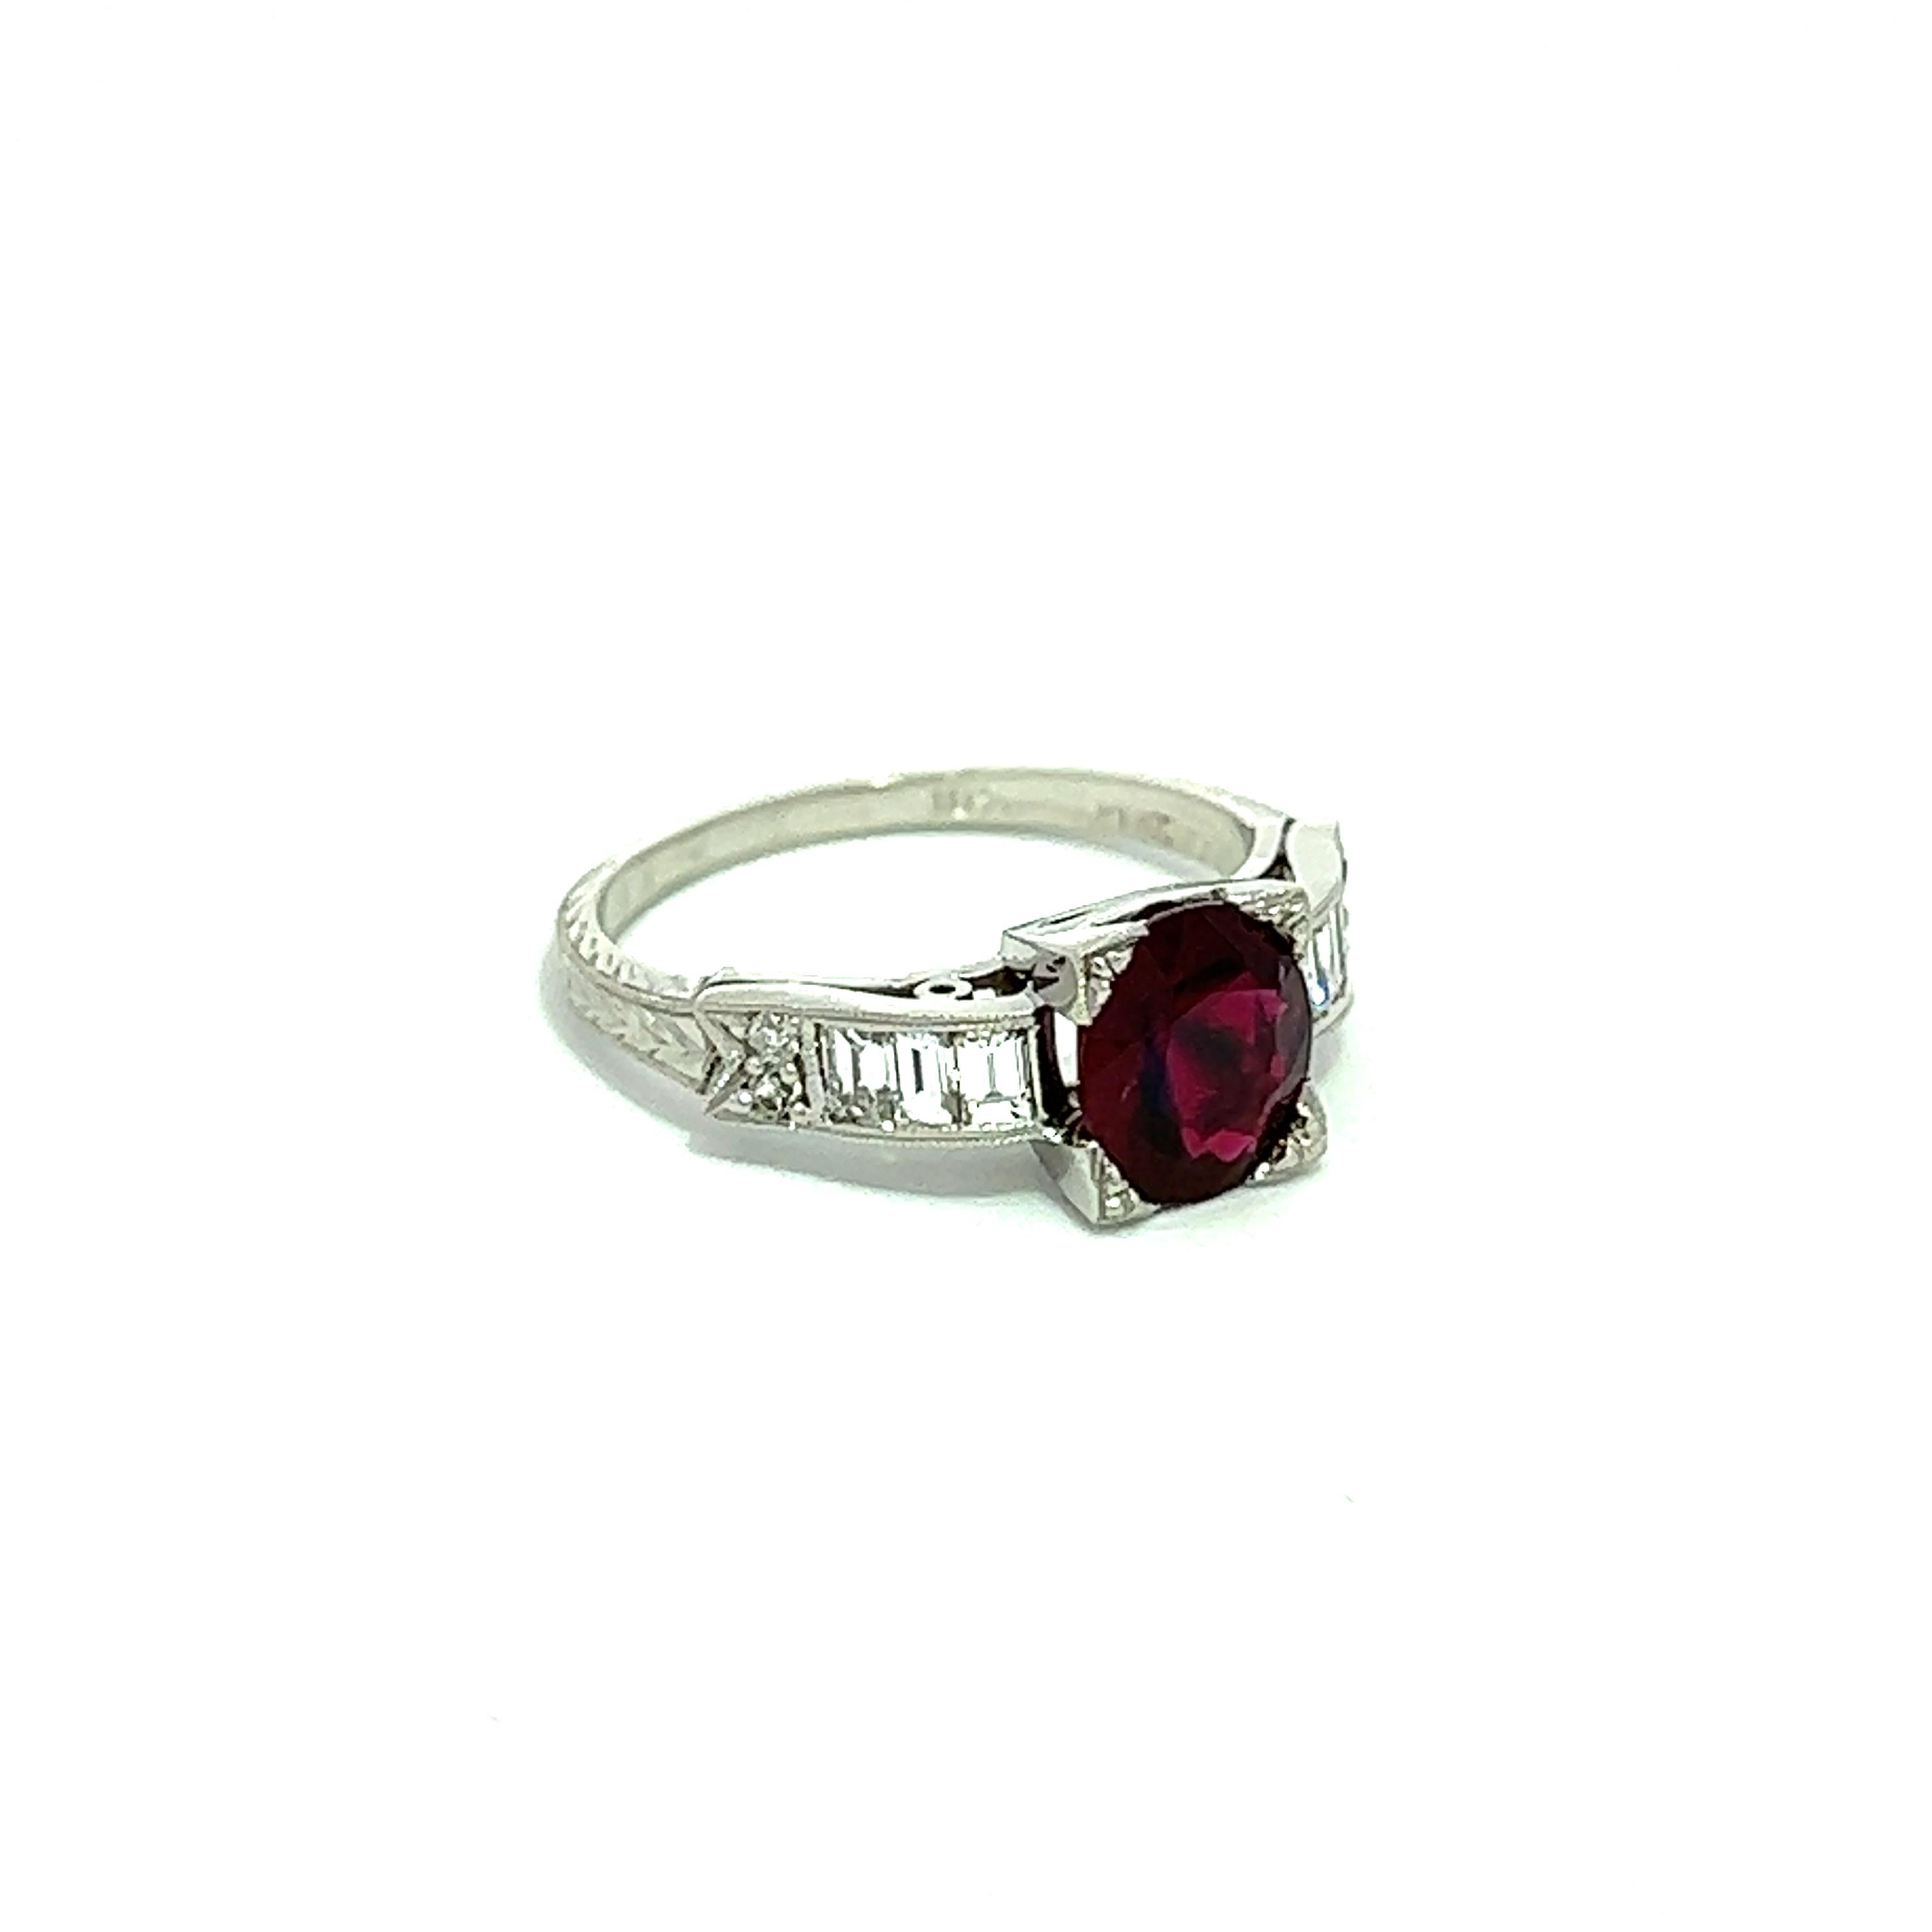 For those who adore vintage, this art deco cocktail ring is an absolute must-have. The natural oval ruby is truly a work of art, complemented by emerald cut diamonds on either side, all securely set in platinum. The remarkable ruby is absolutely